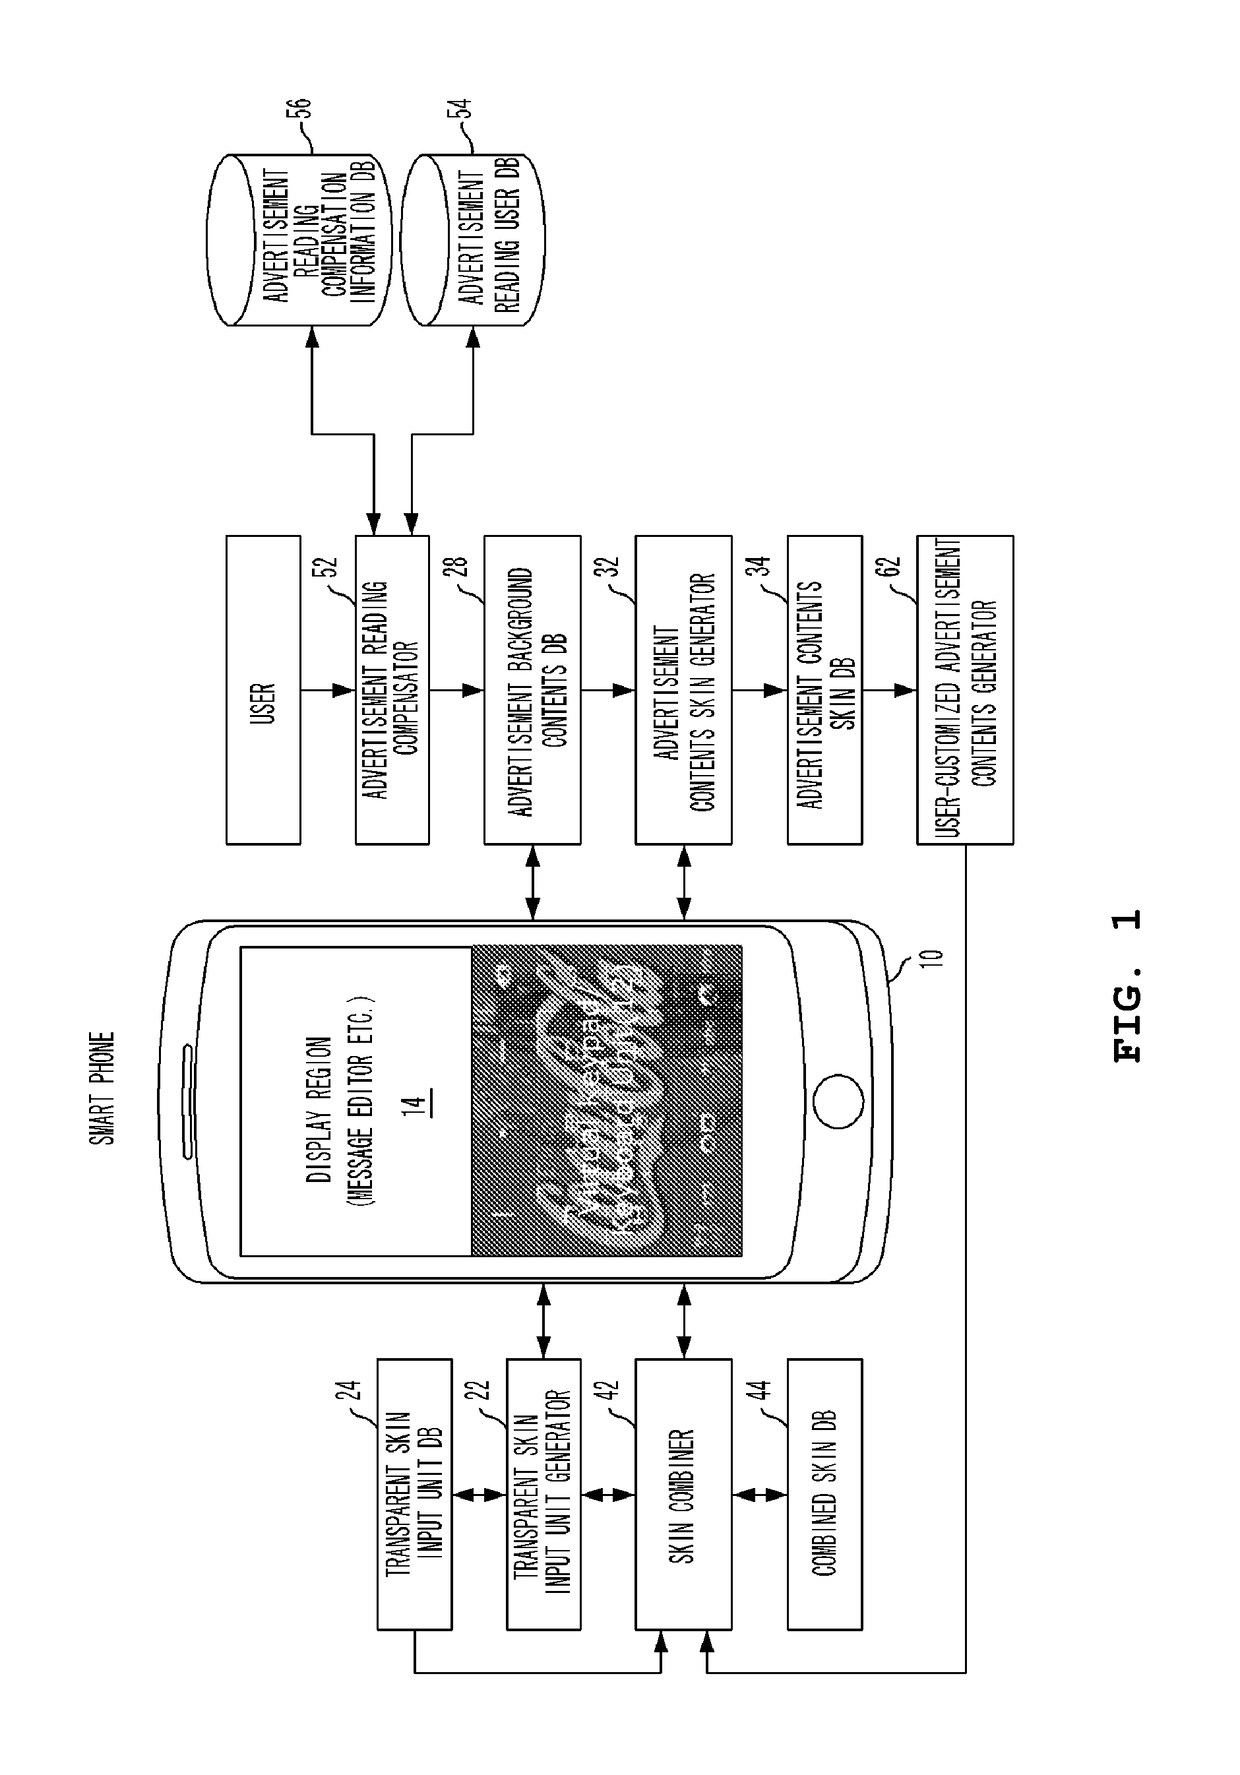 Method and system for providing background advertisement of virtual key input device